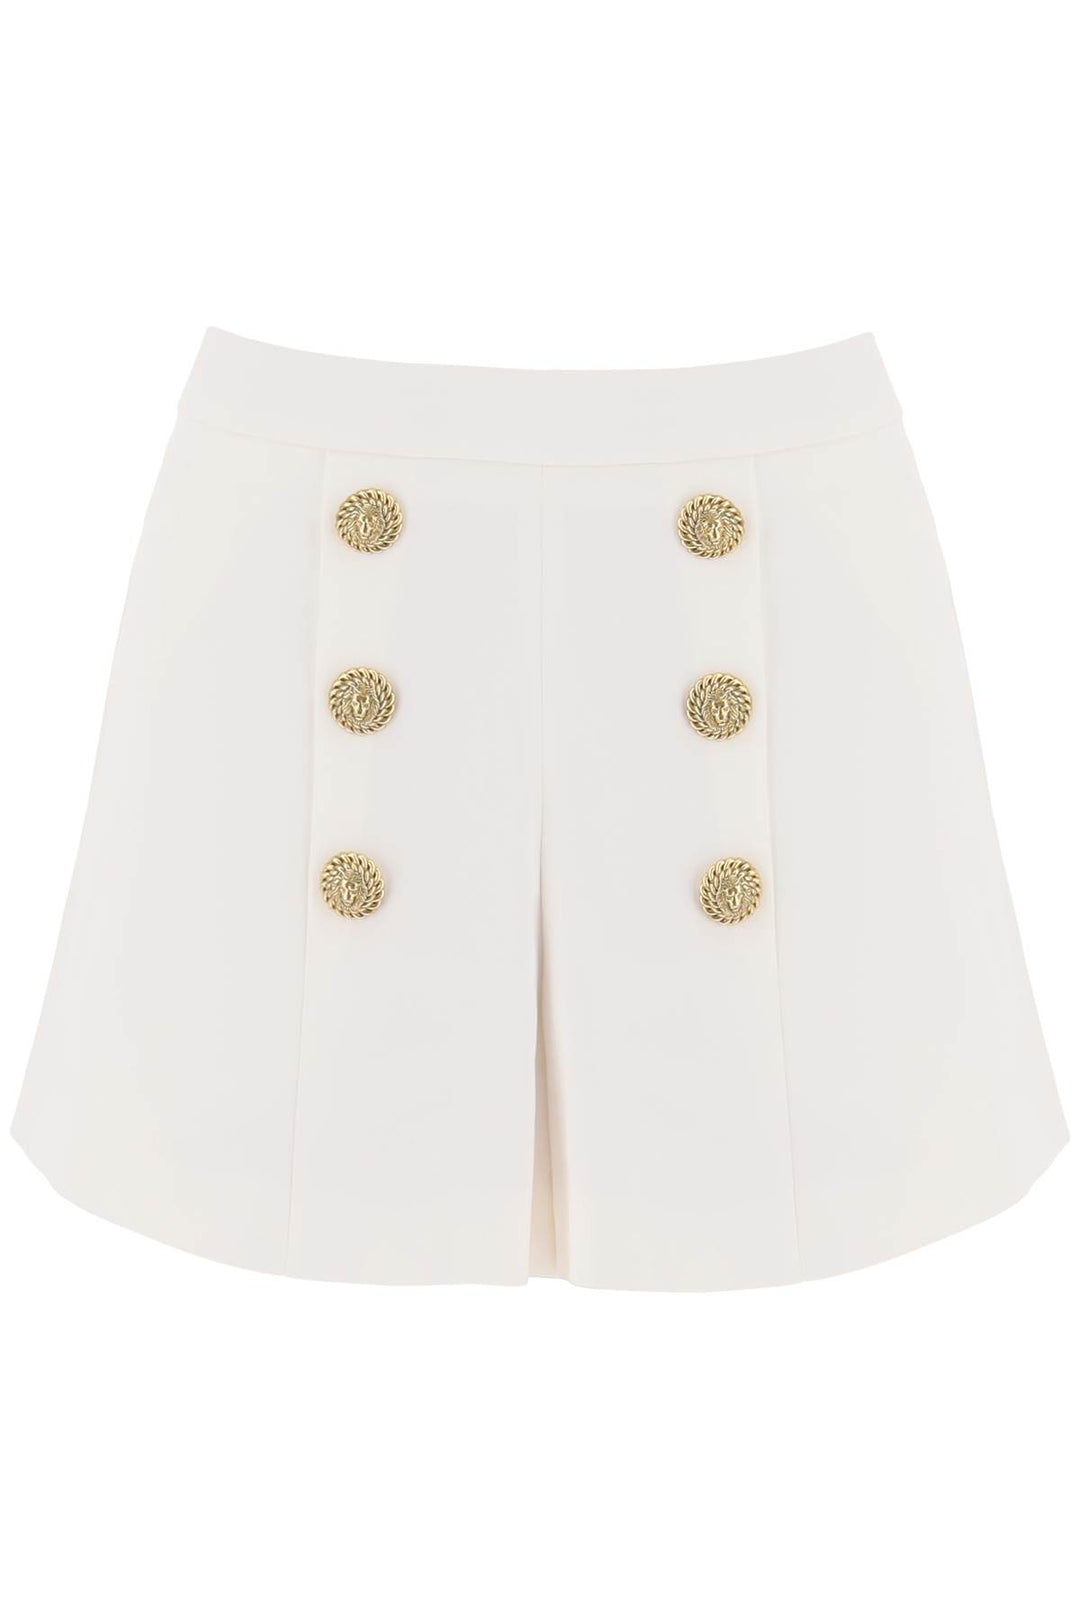 Balmain Crepe Shorts With Embossed Buttons   White